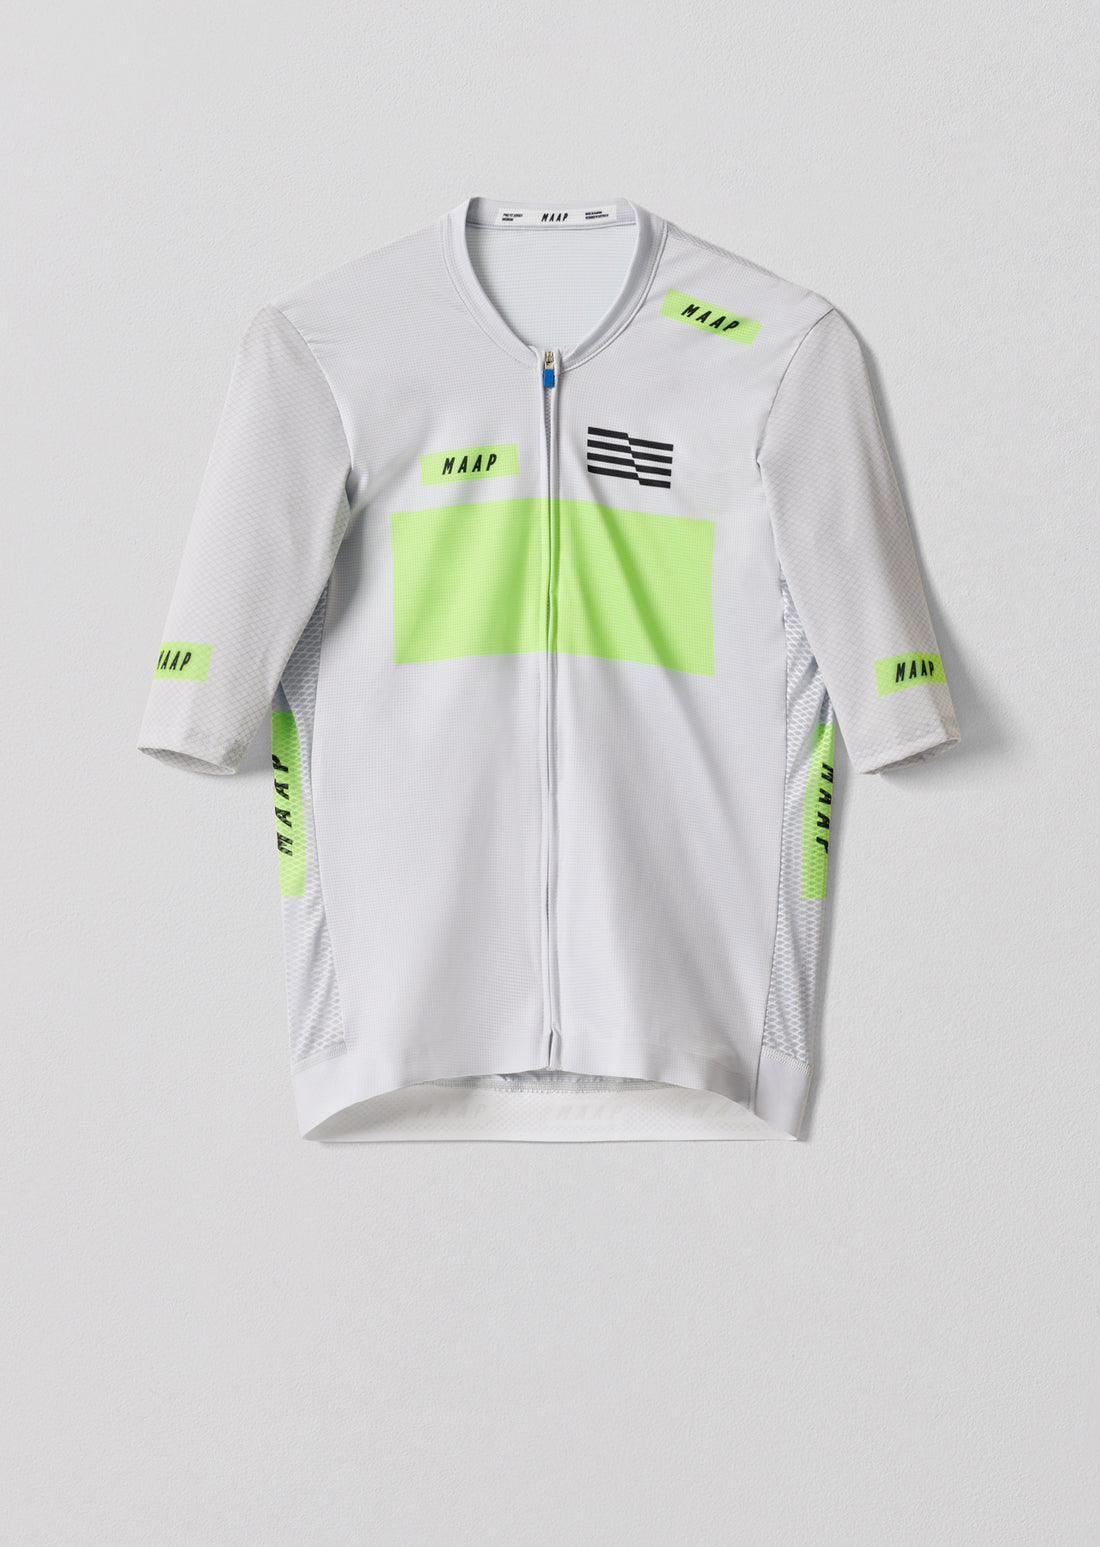 System Pro Air Jersey